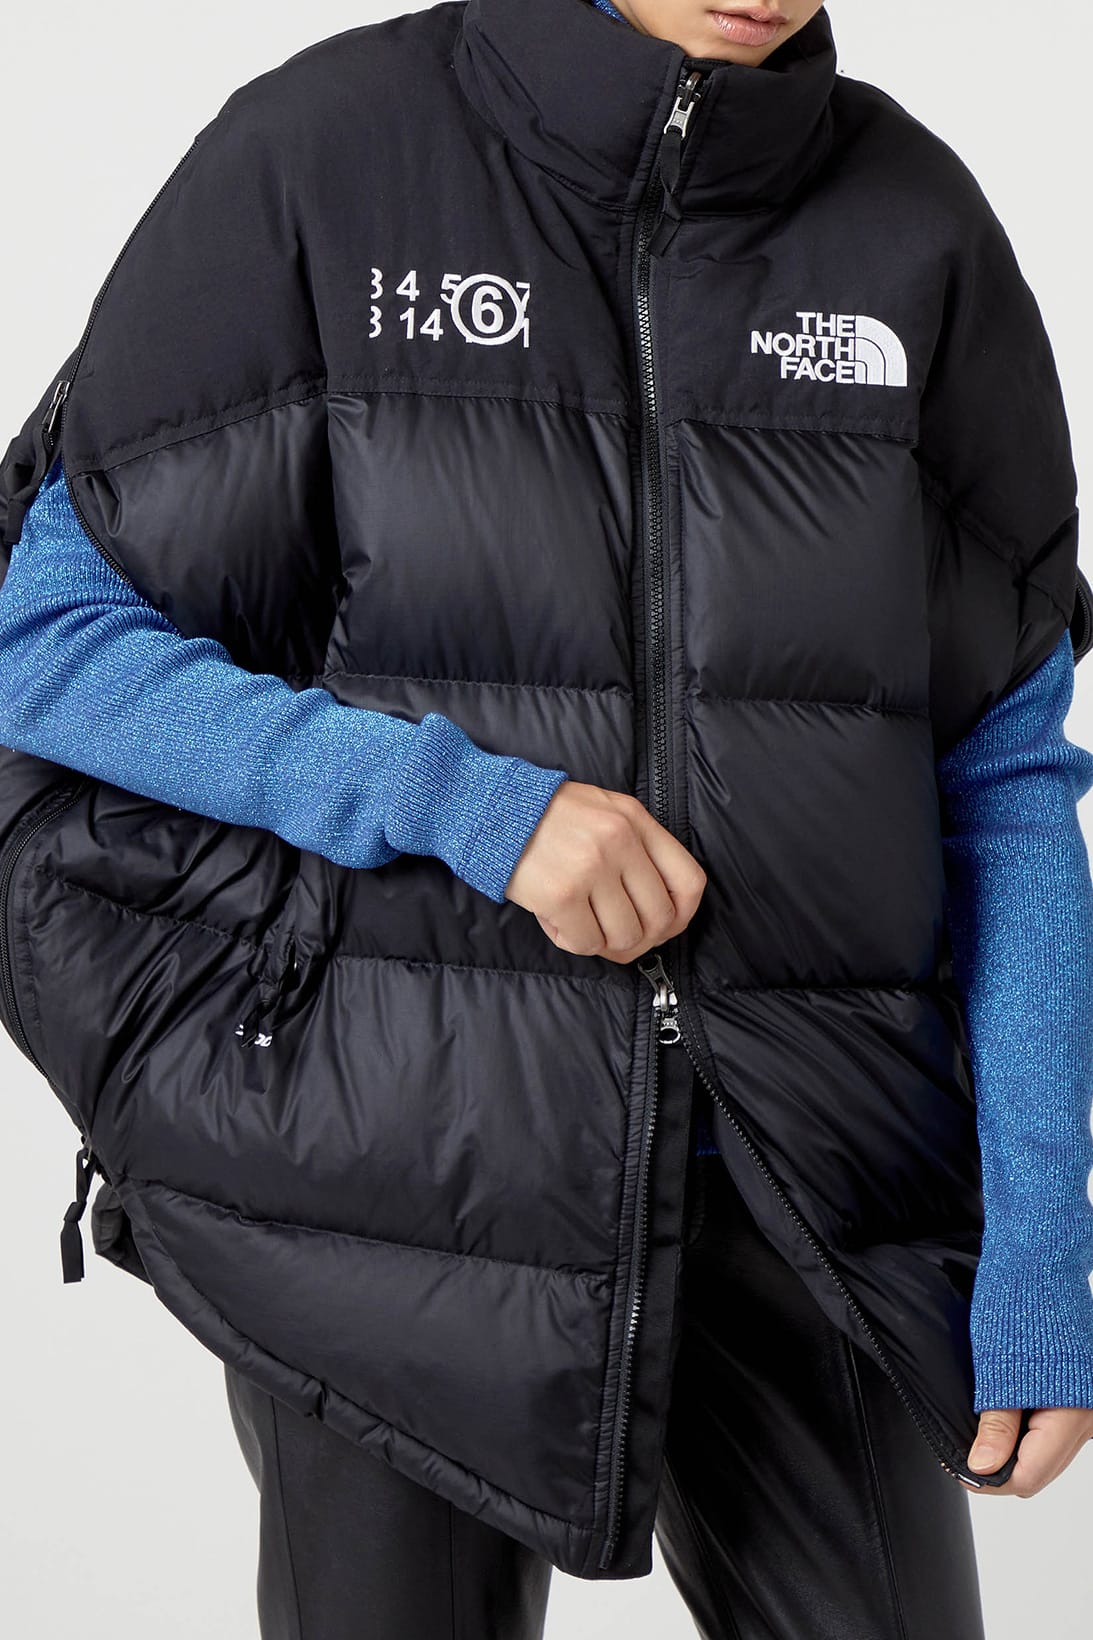 buy the north face